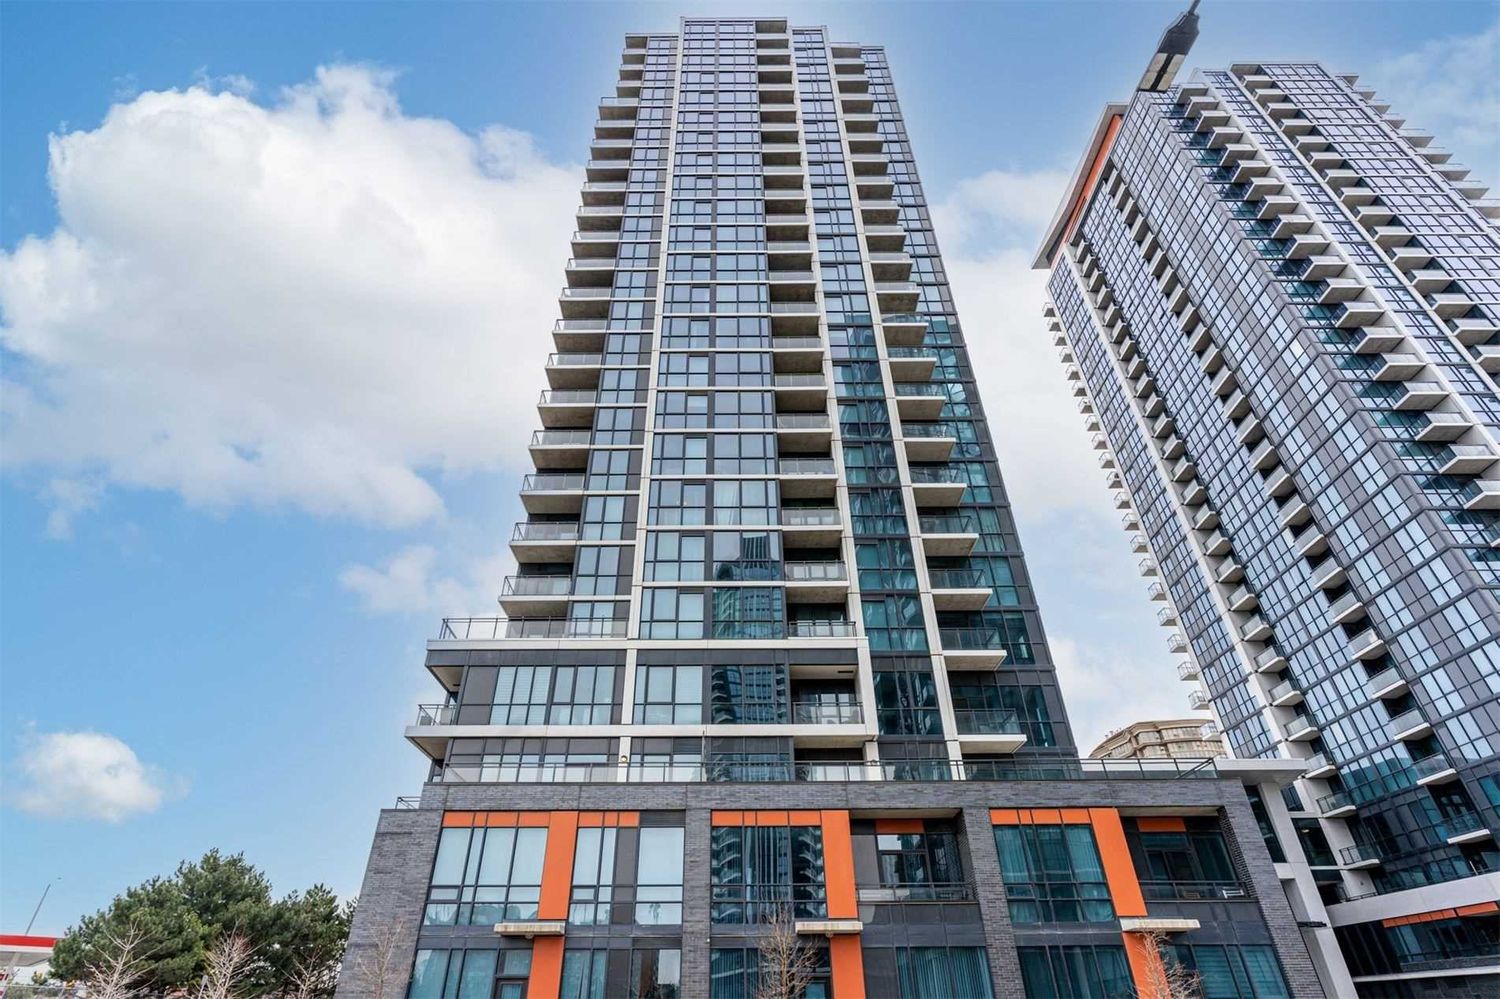 55 Eglinton Avenue W. Crystal  Condos is located in  Mississauga, Toronto - image #2 of 2